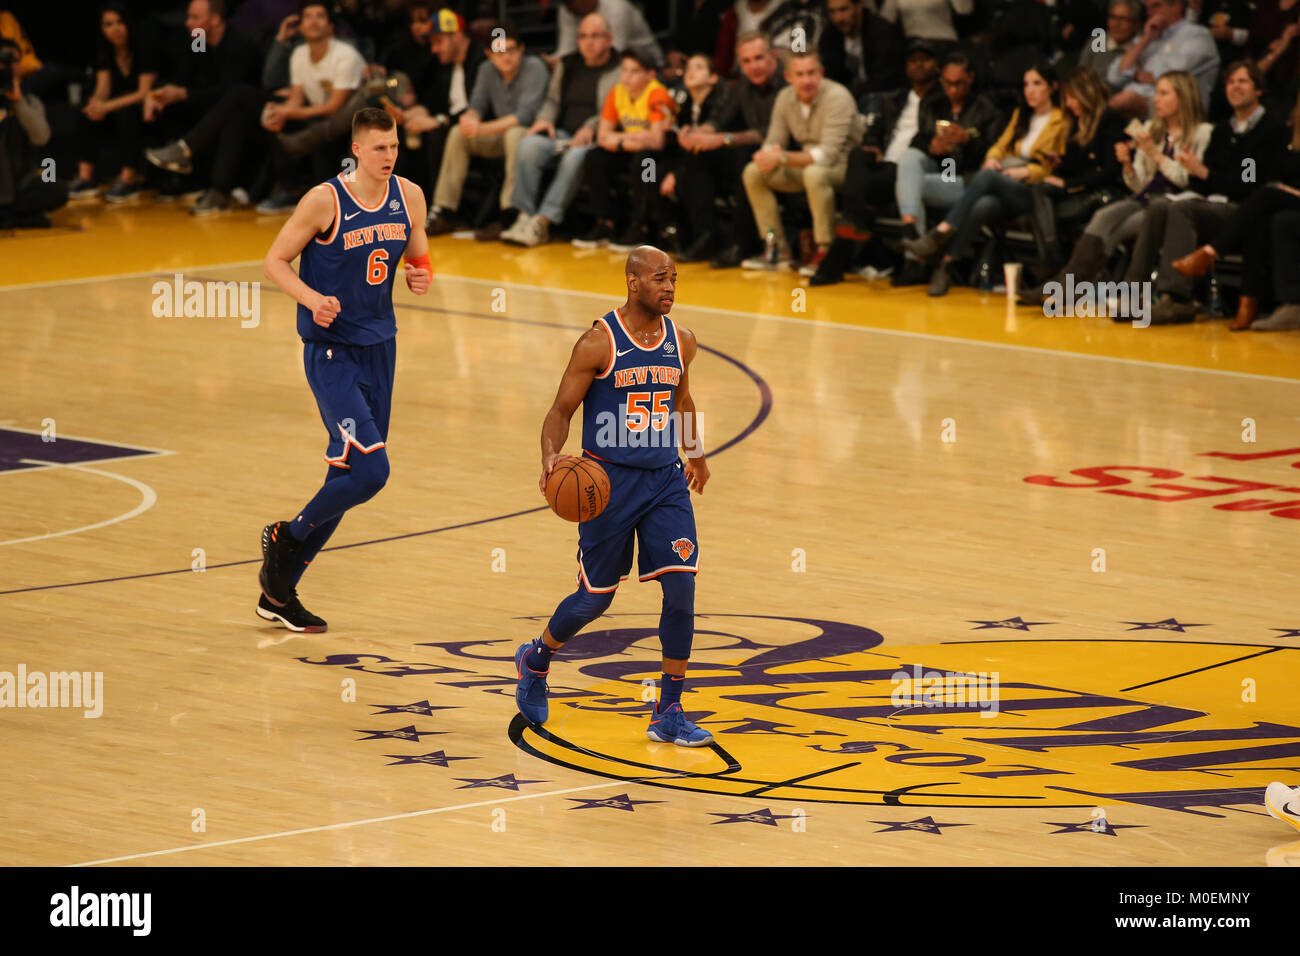 Los Angeles, CA, USA. 21st Jan, 2018. New York Knicks guard Jarrett Jack (55) bring the ball up the court during the New York Knicks vs Los Angeles Lakers at Staples Center on January 21, 2018. (Photo by Jevone Moore) Credit: csm/Alamy Live News Stock Photo